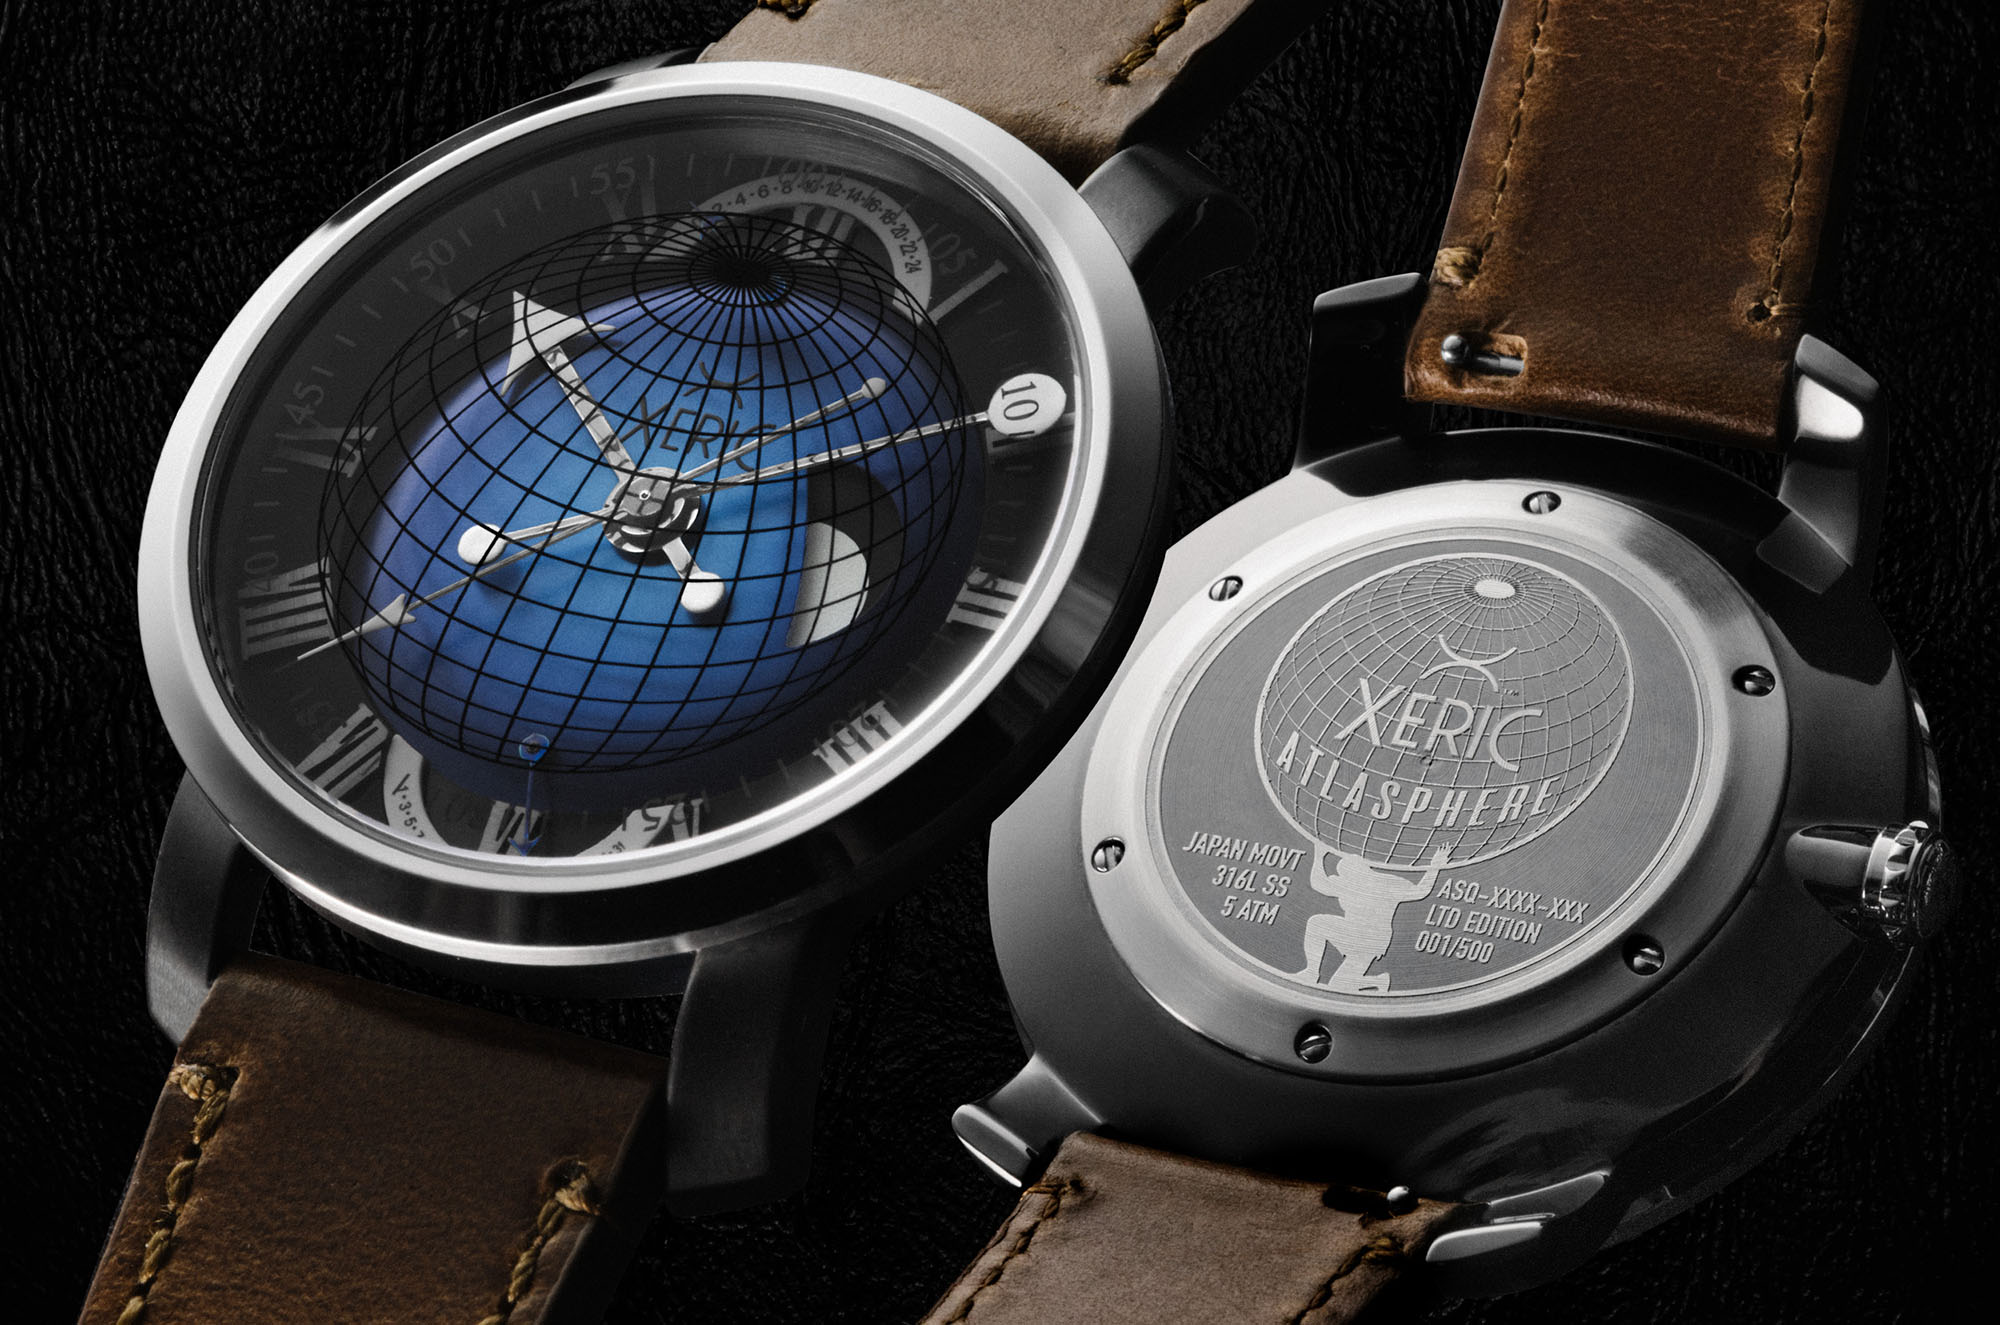 Enter the Atlasphere – New Collection from Xeric Watches